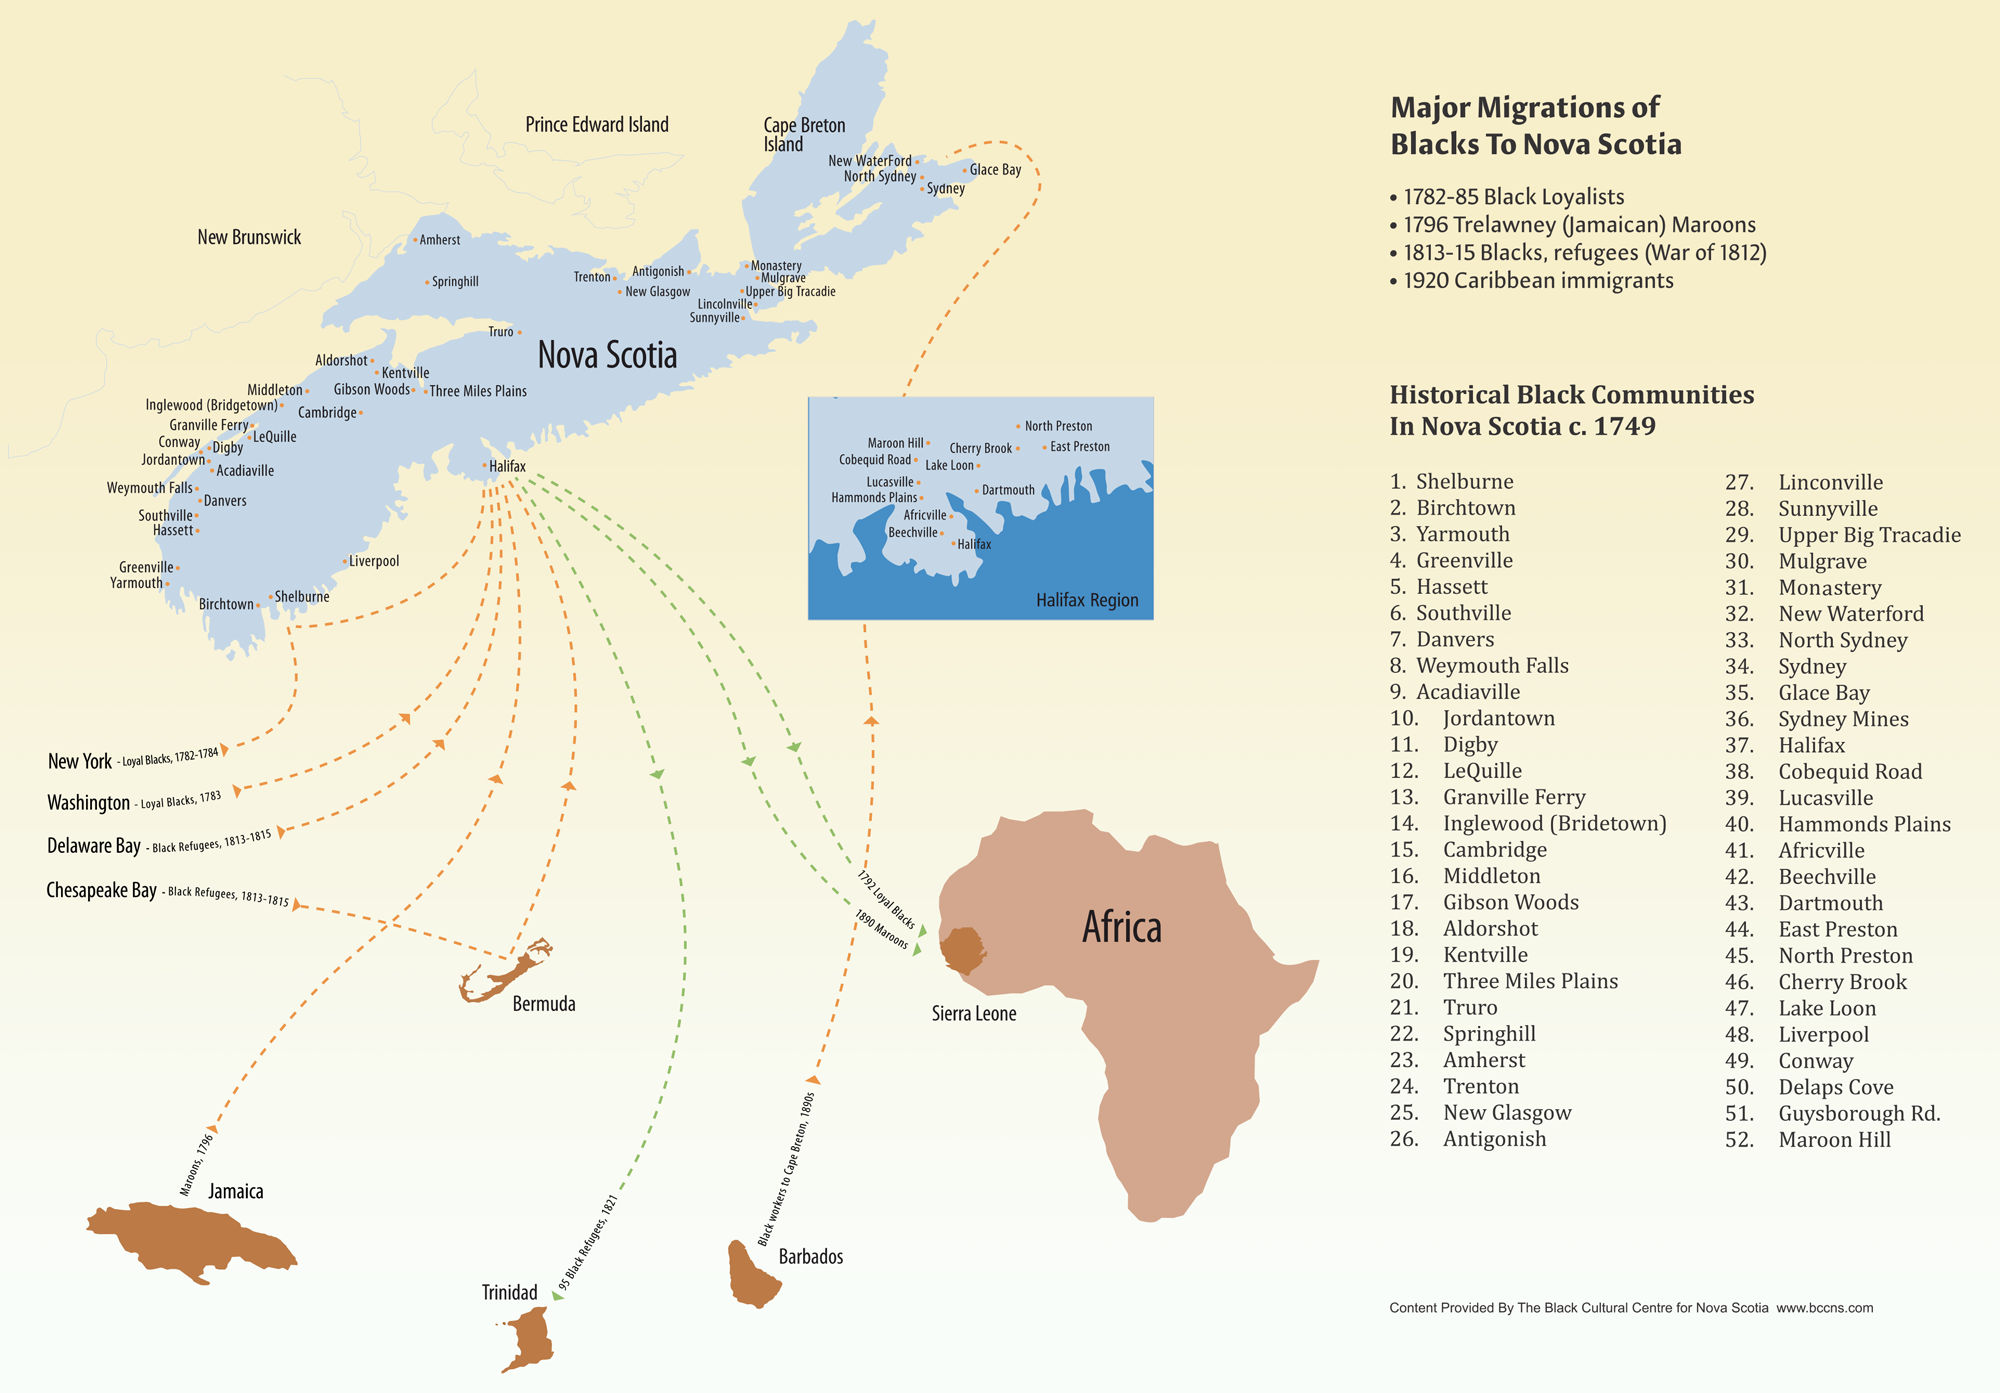 Historical Black Communities and Migration Routes